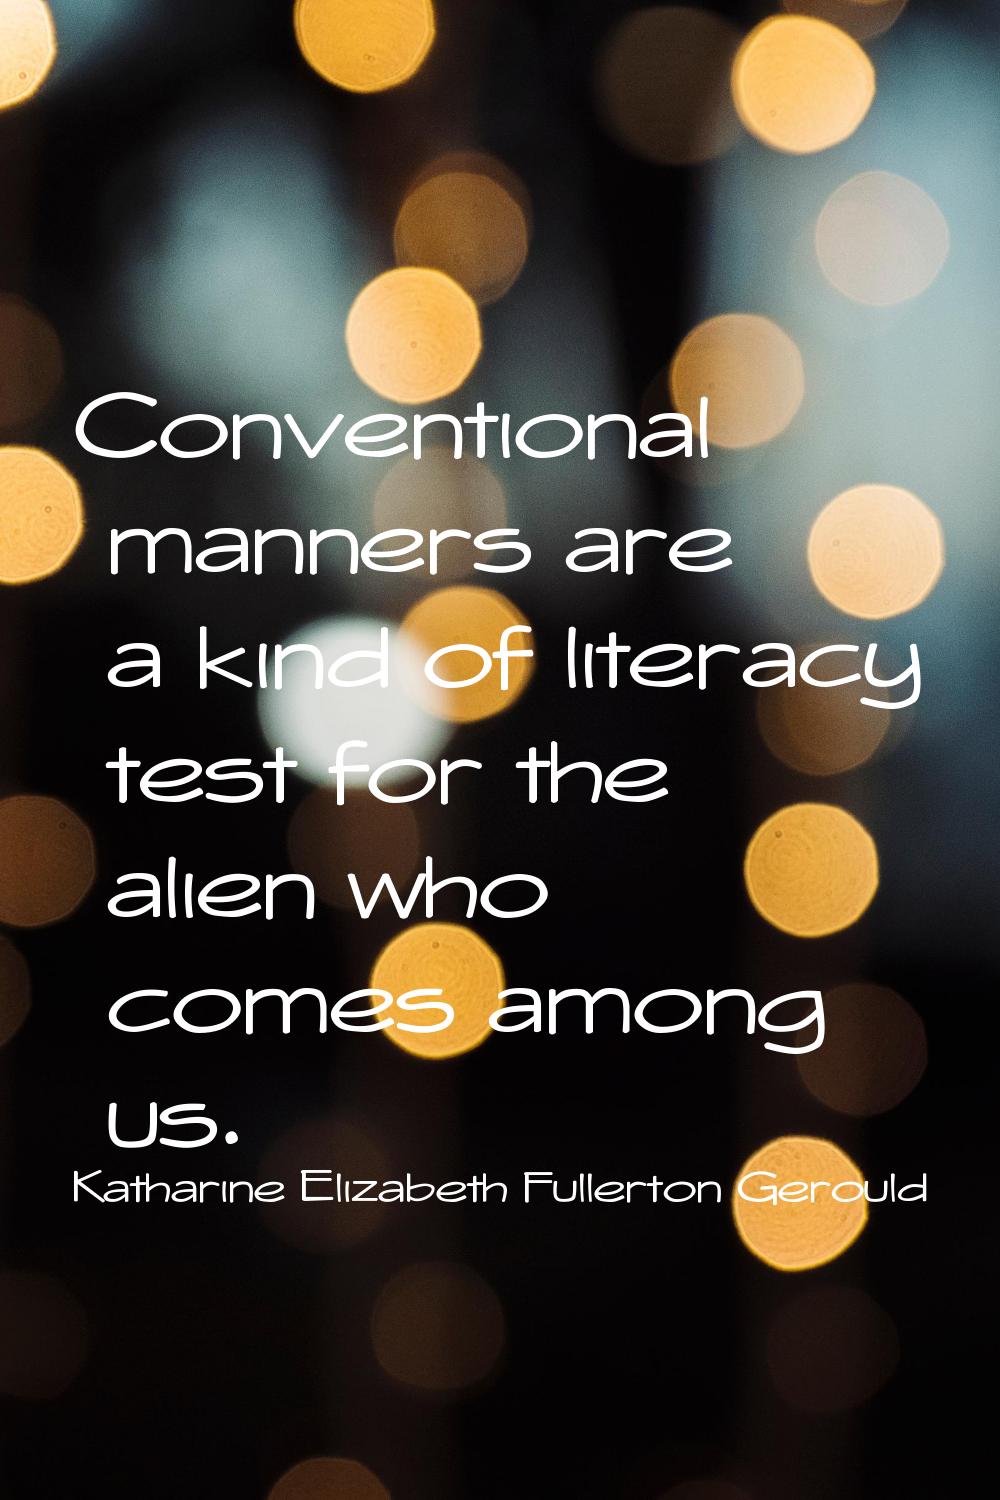 Conventional manners are a kind of literacy test for the alien who comes among us.